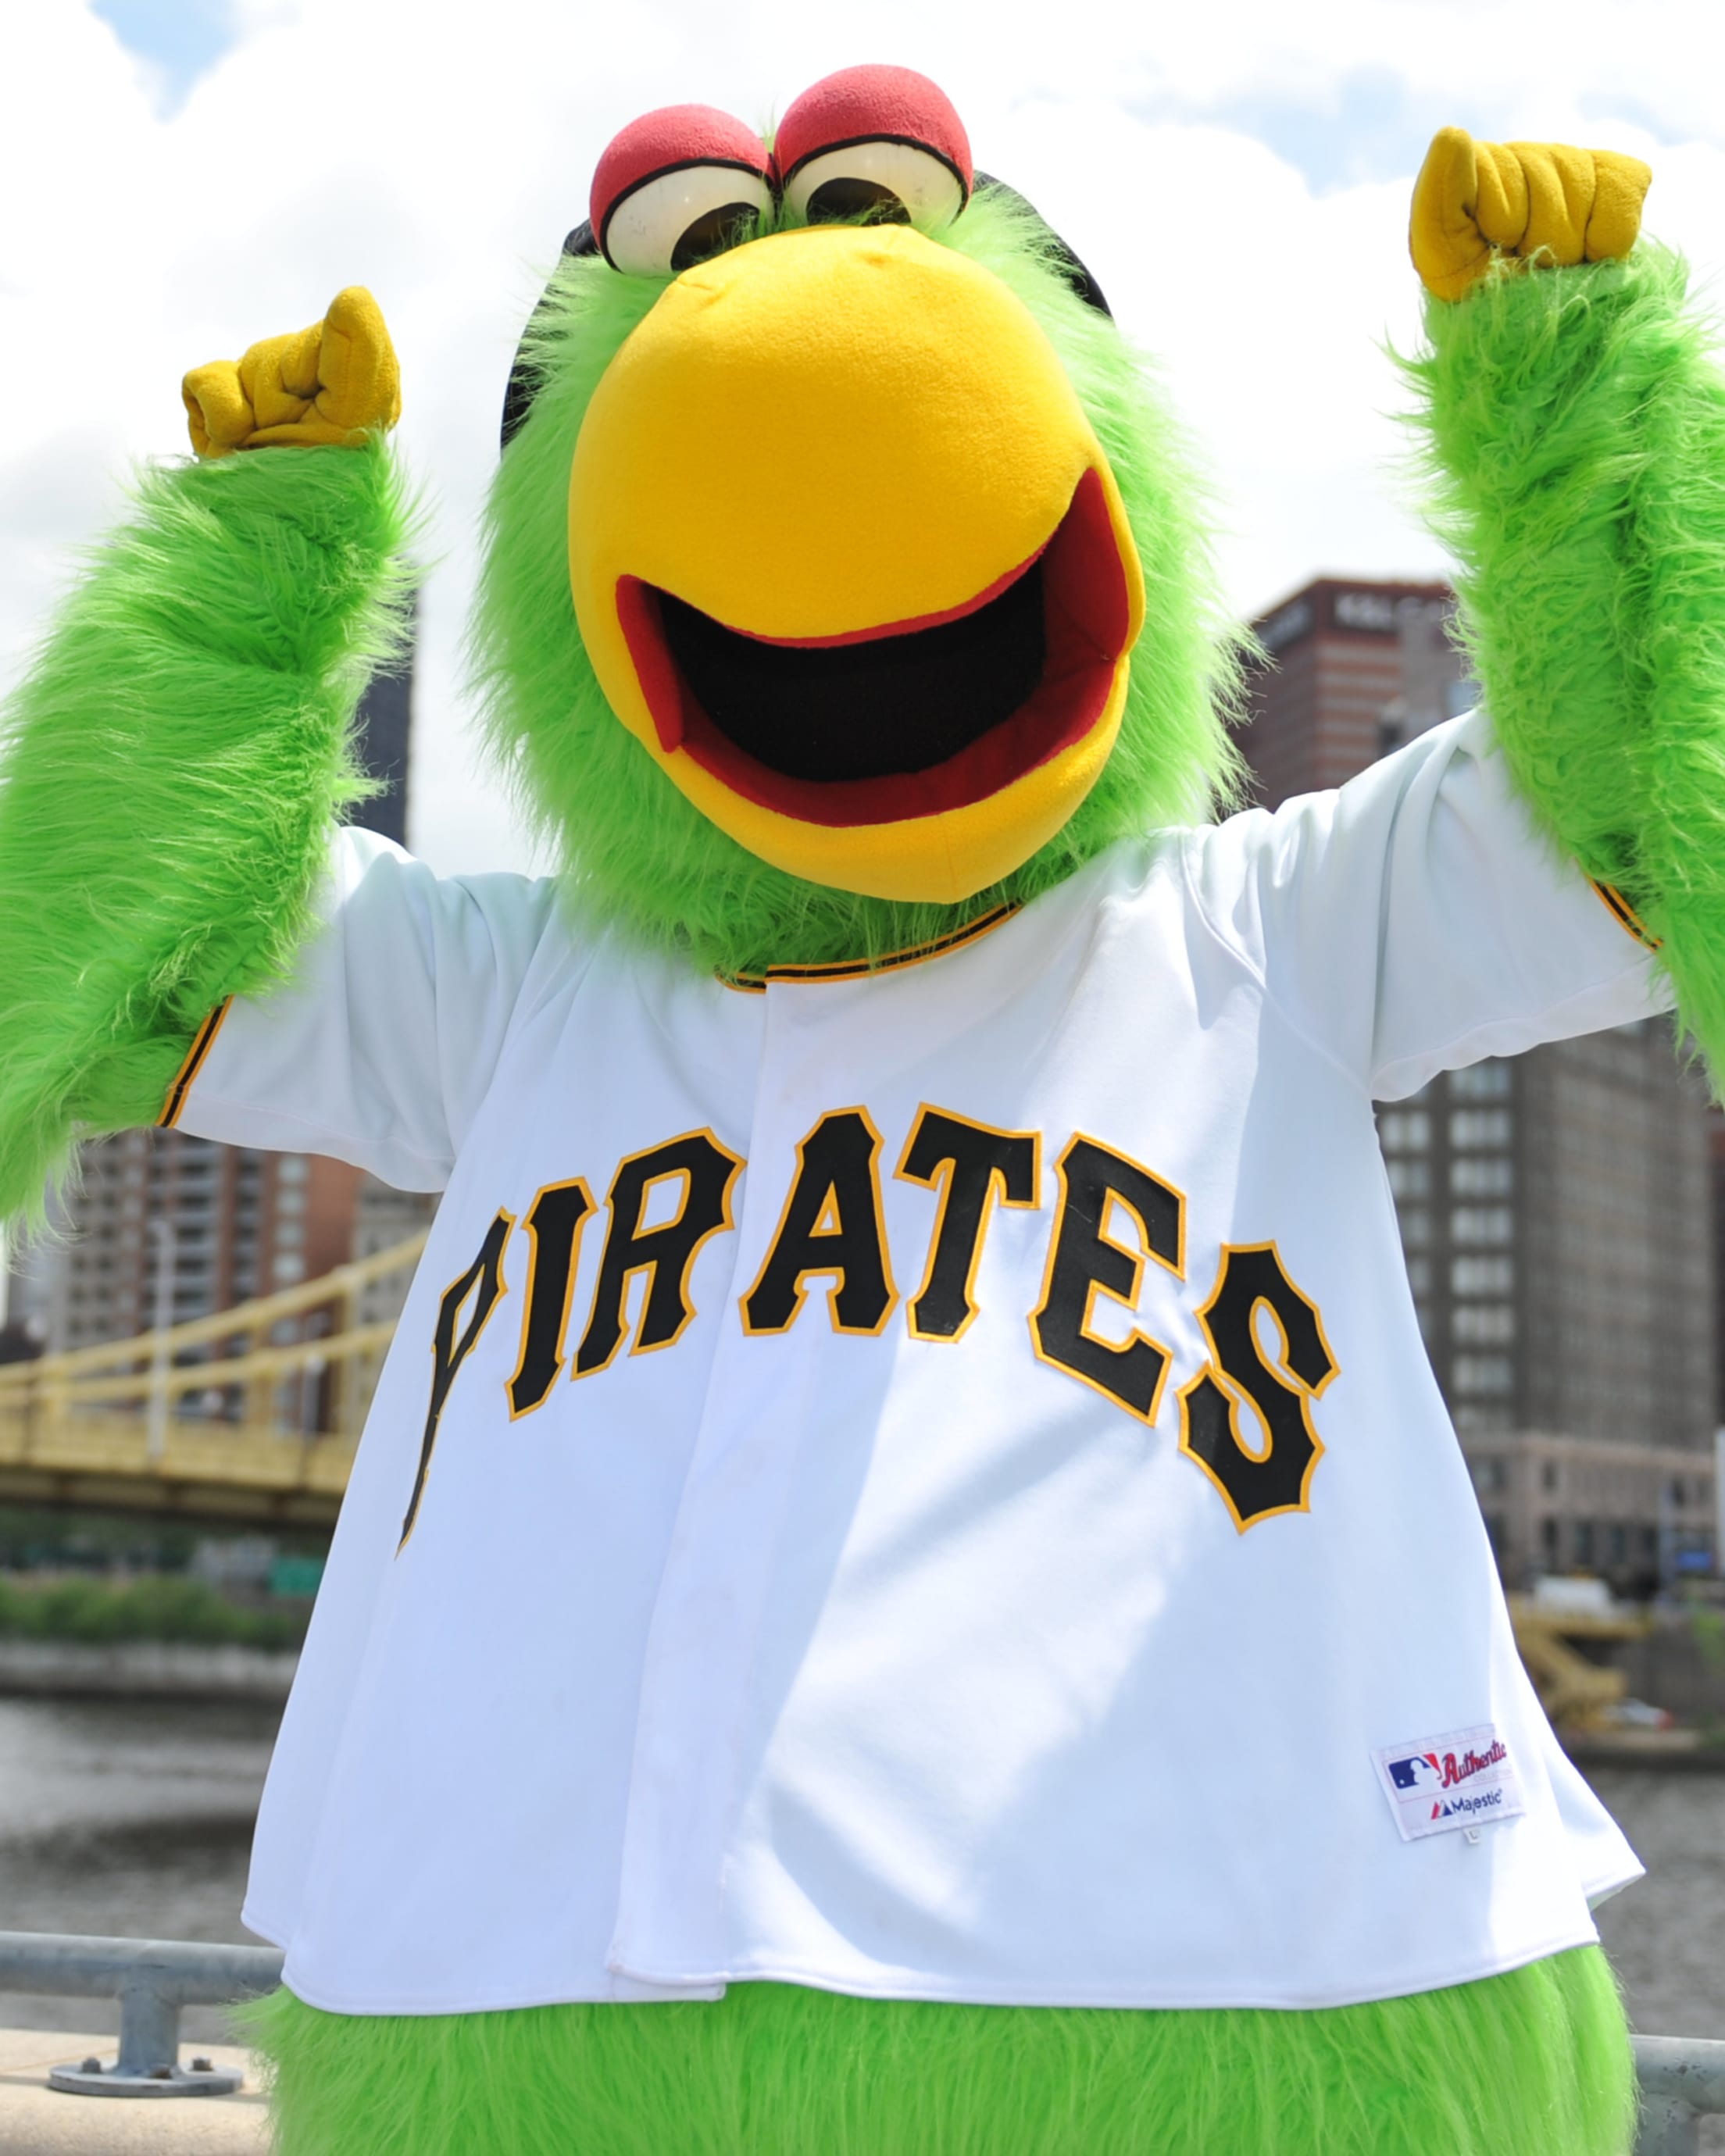 The mascot of the Pittsburgh Pirates, the Pirate Parrot, wears a